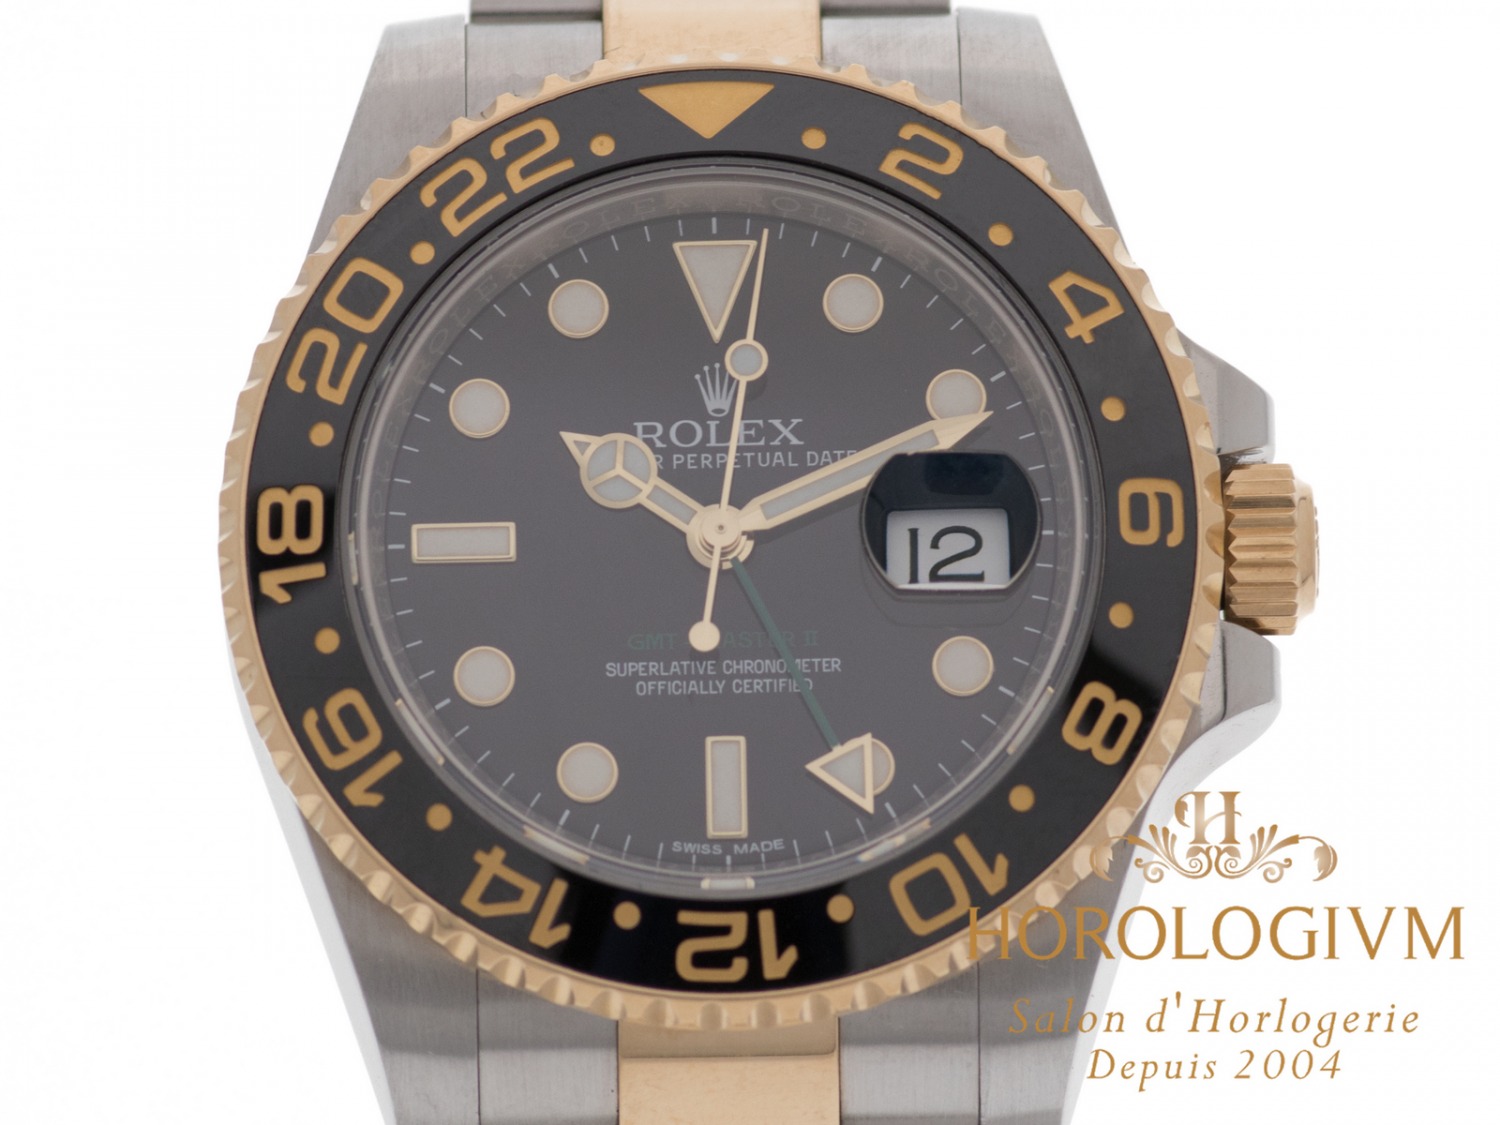 Rolex GMT Master II TwoTone Ref. 116713LN watch, two-tone (bi-colored) silver and yellow gold